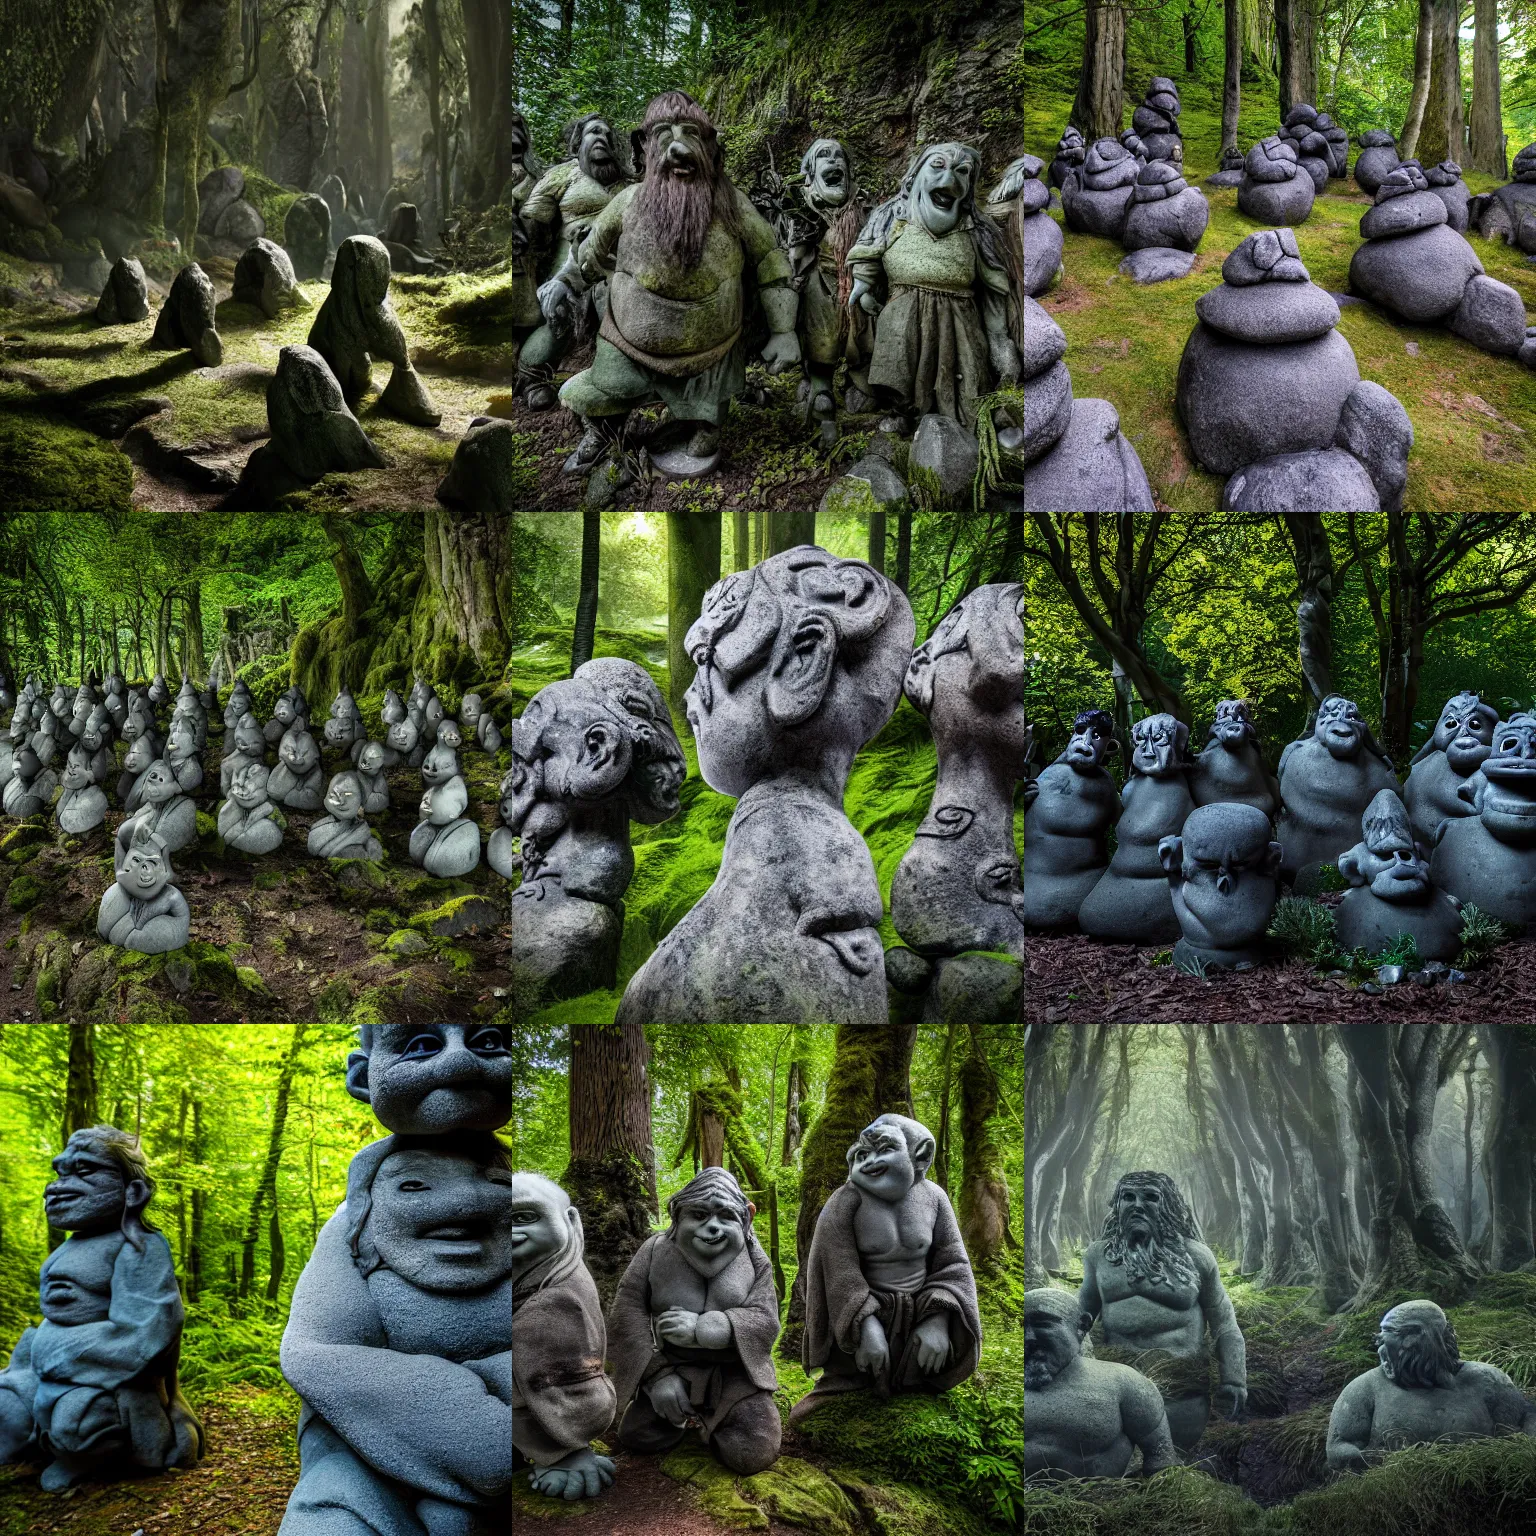 Prompt: 4 k photograph of trolls turned to stone from the hobbit, dark forest background, sunlight filtering through the trees.